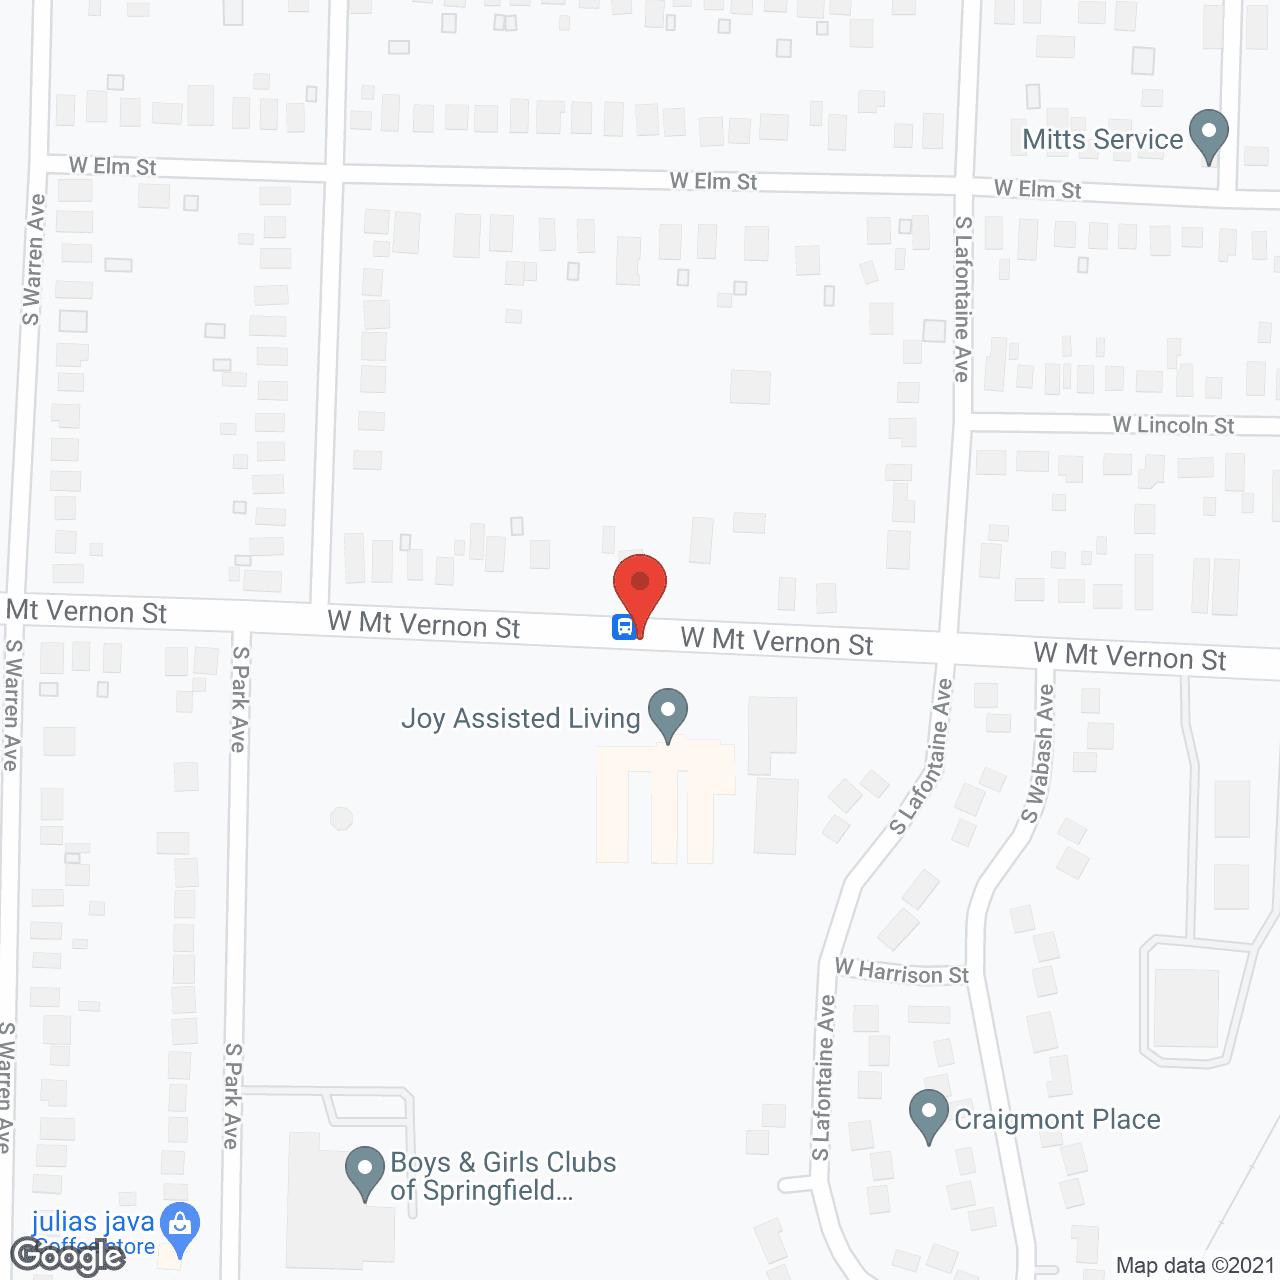 Joy Assisted Living in google map